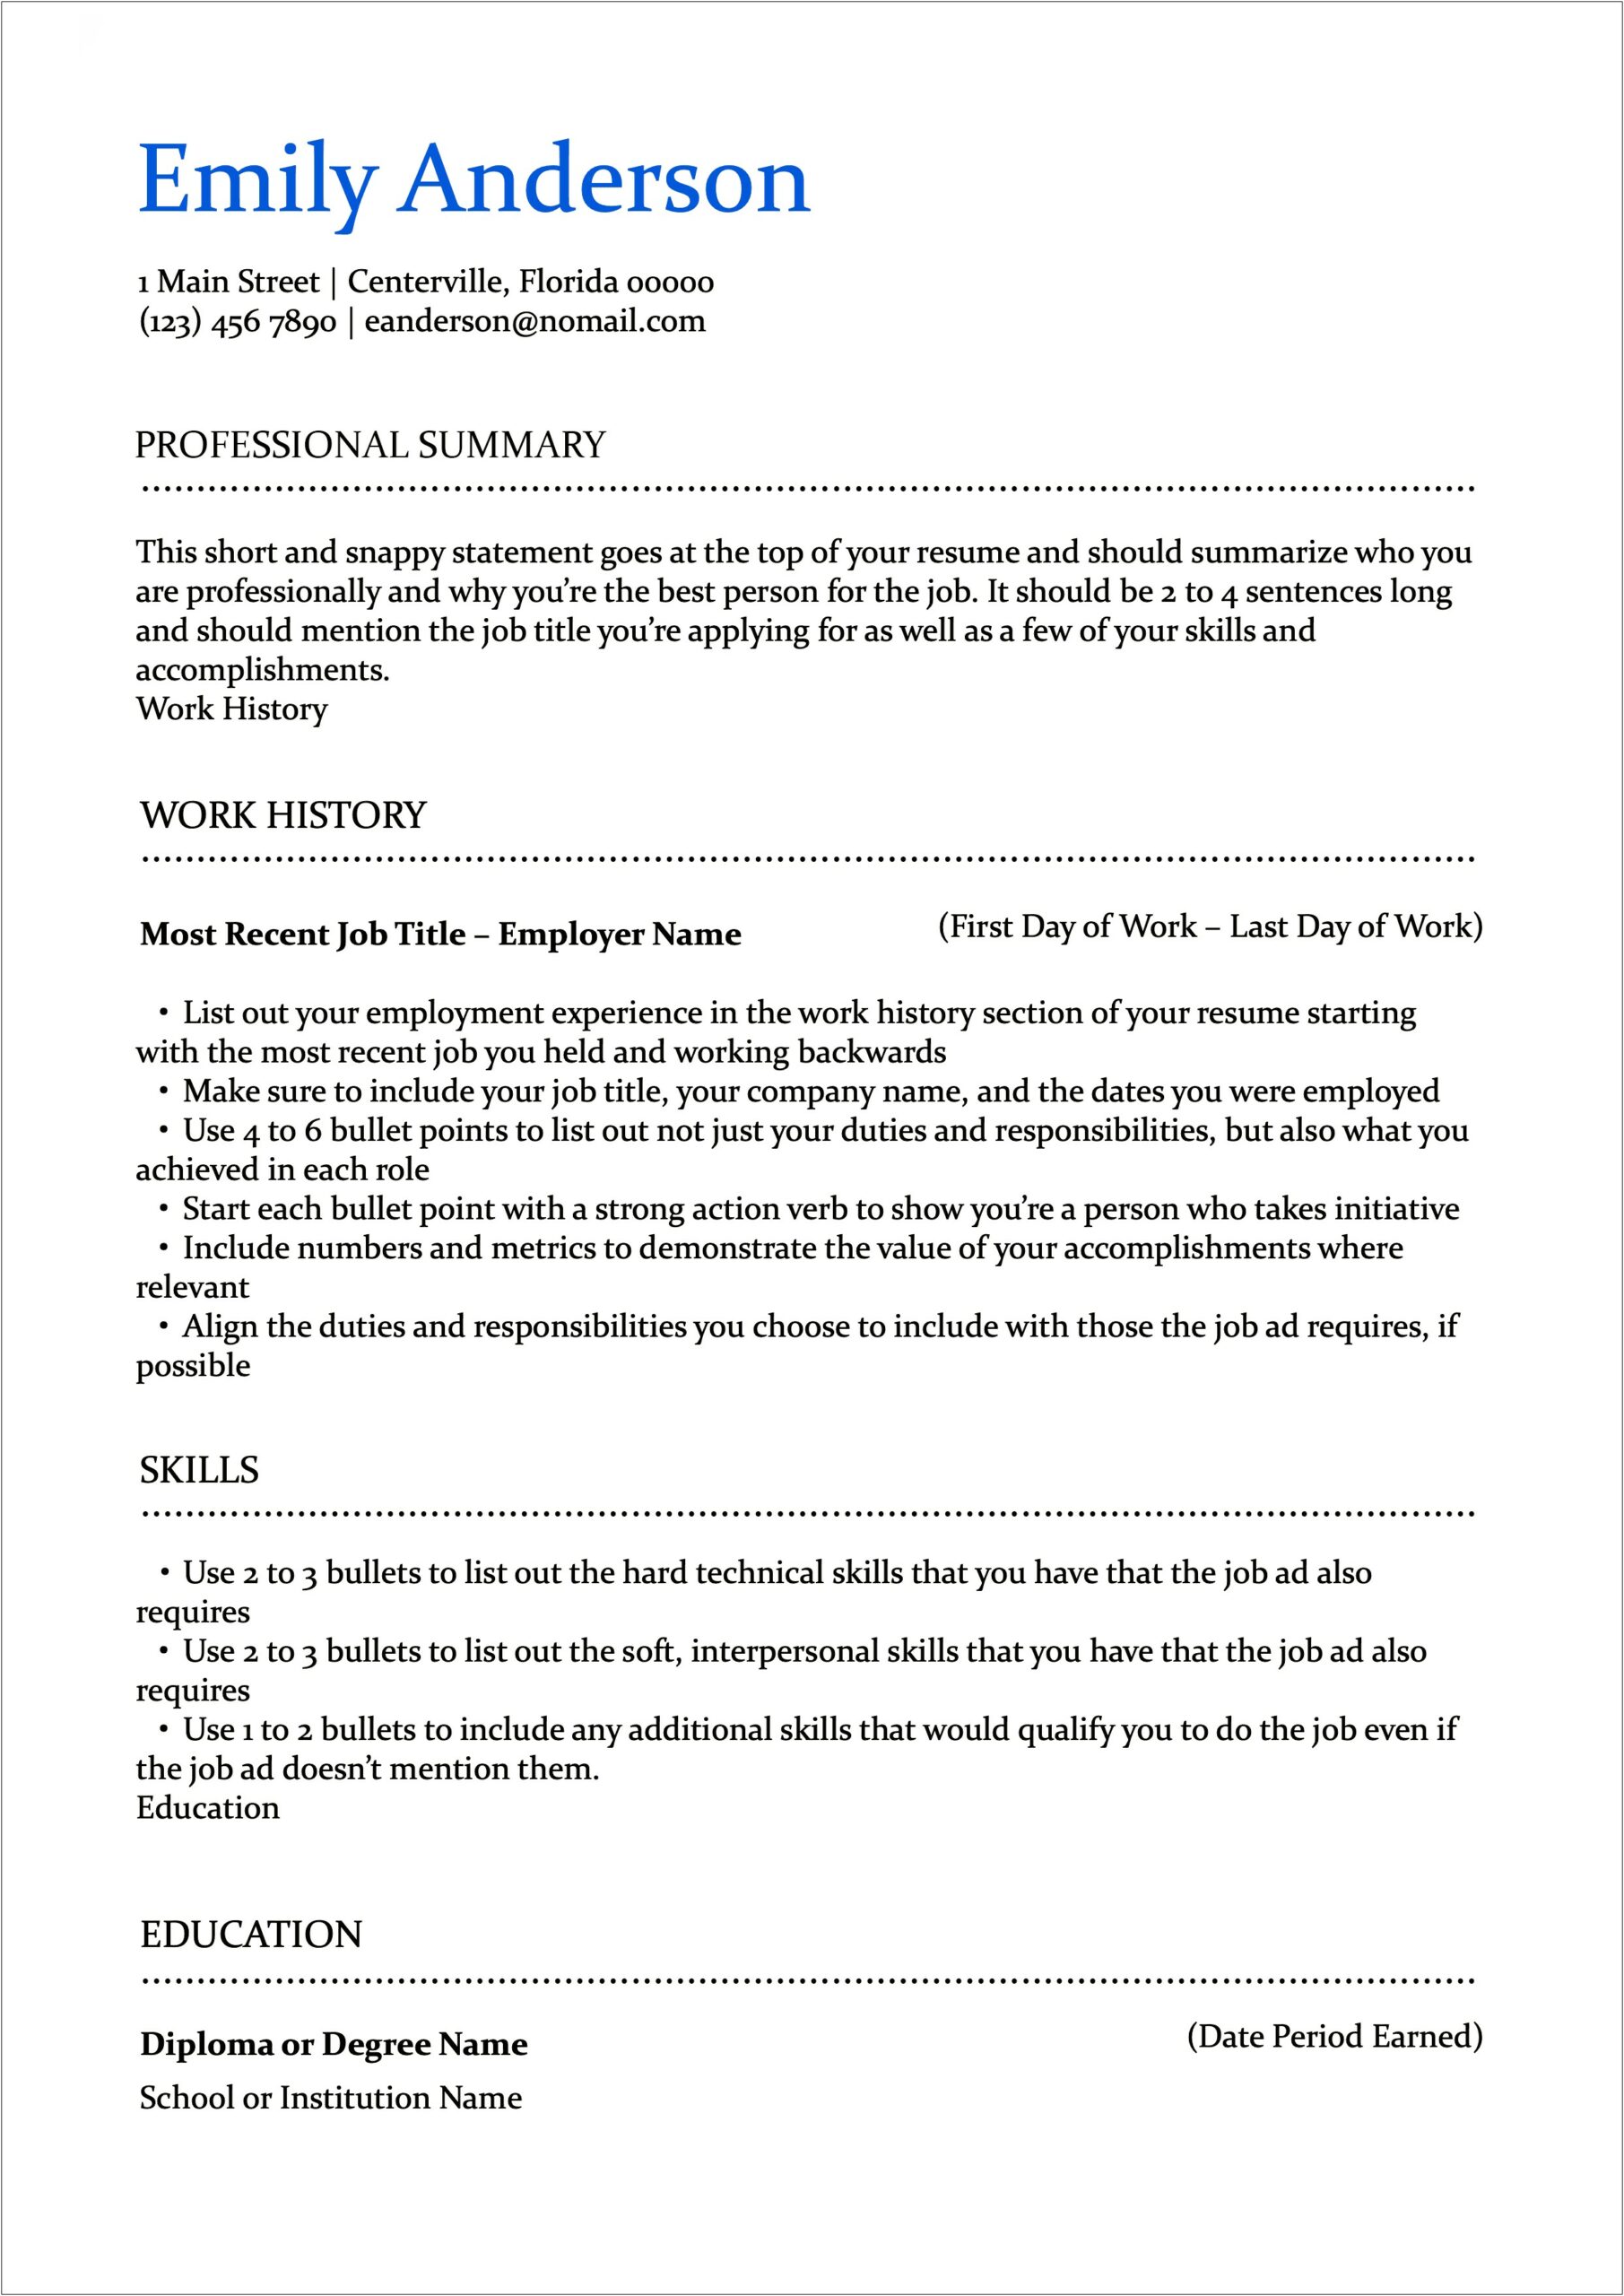 Booth School Of Business Resume Template